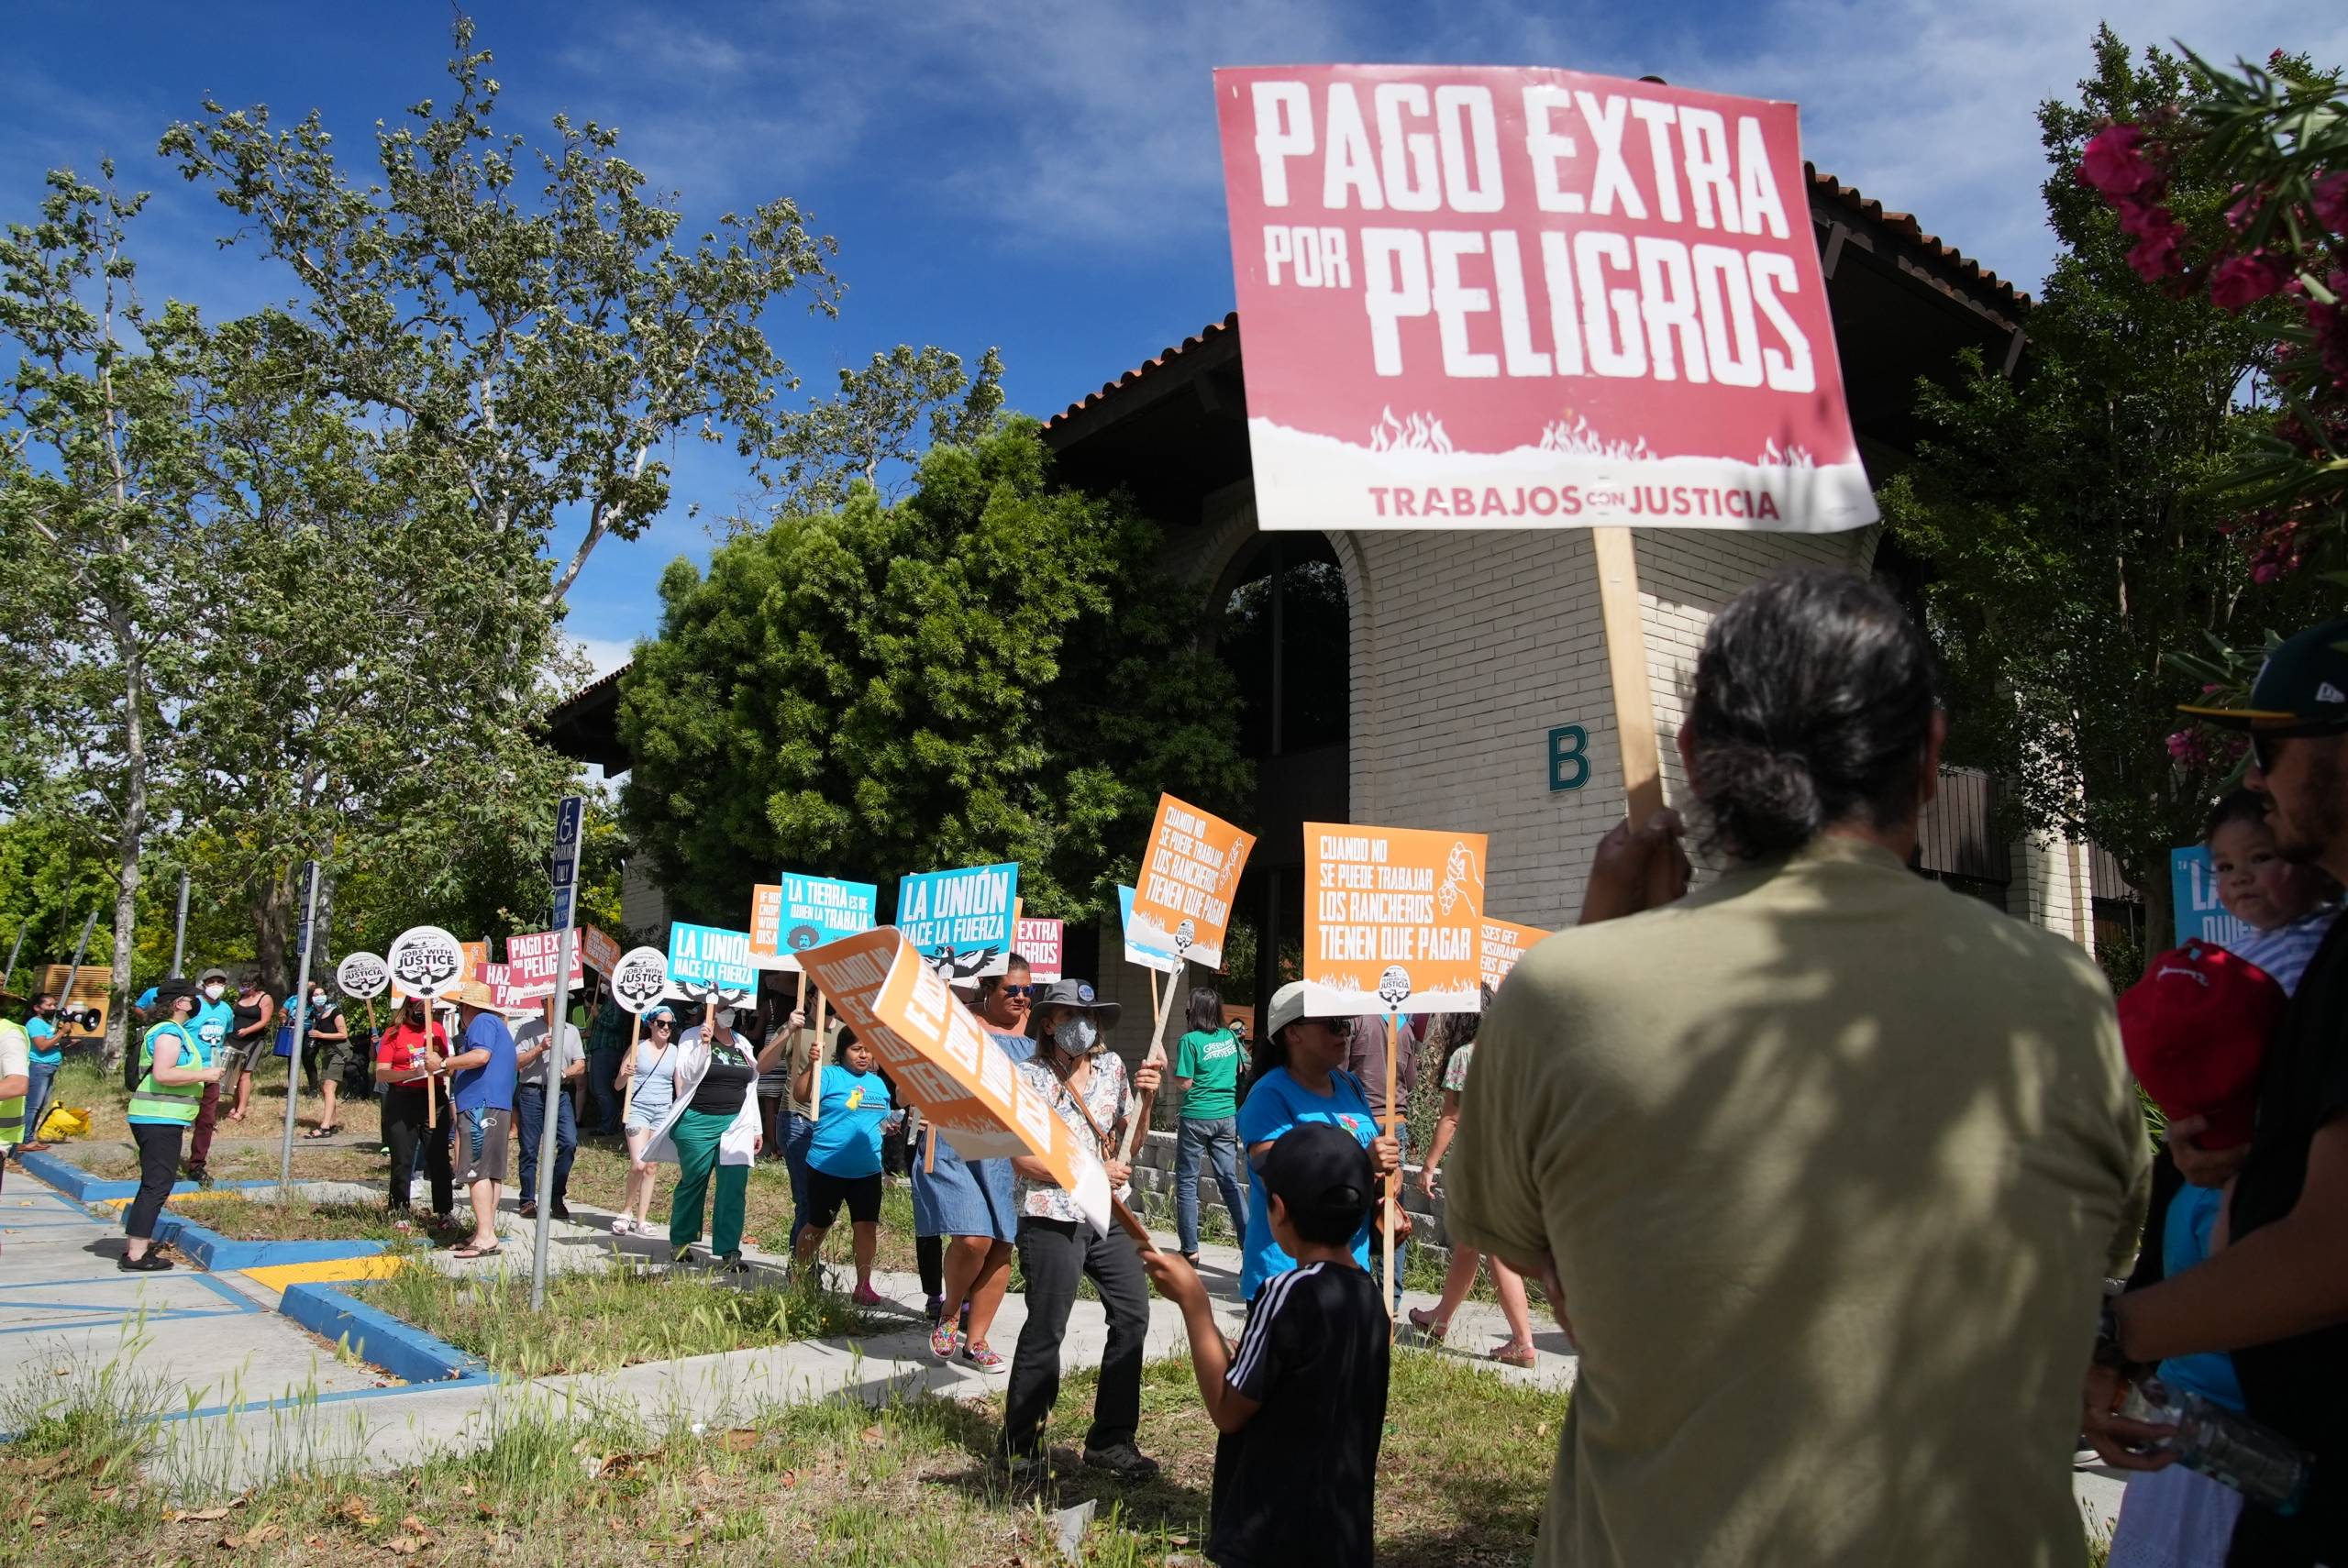 A group of people protest outside an office building. Many are holding signs, one says in Spanish, "Pago extra por peligros" or "hazard pay" in English.